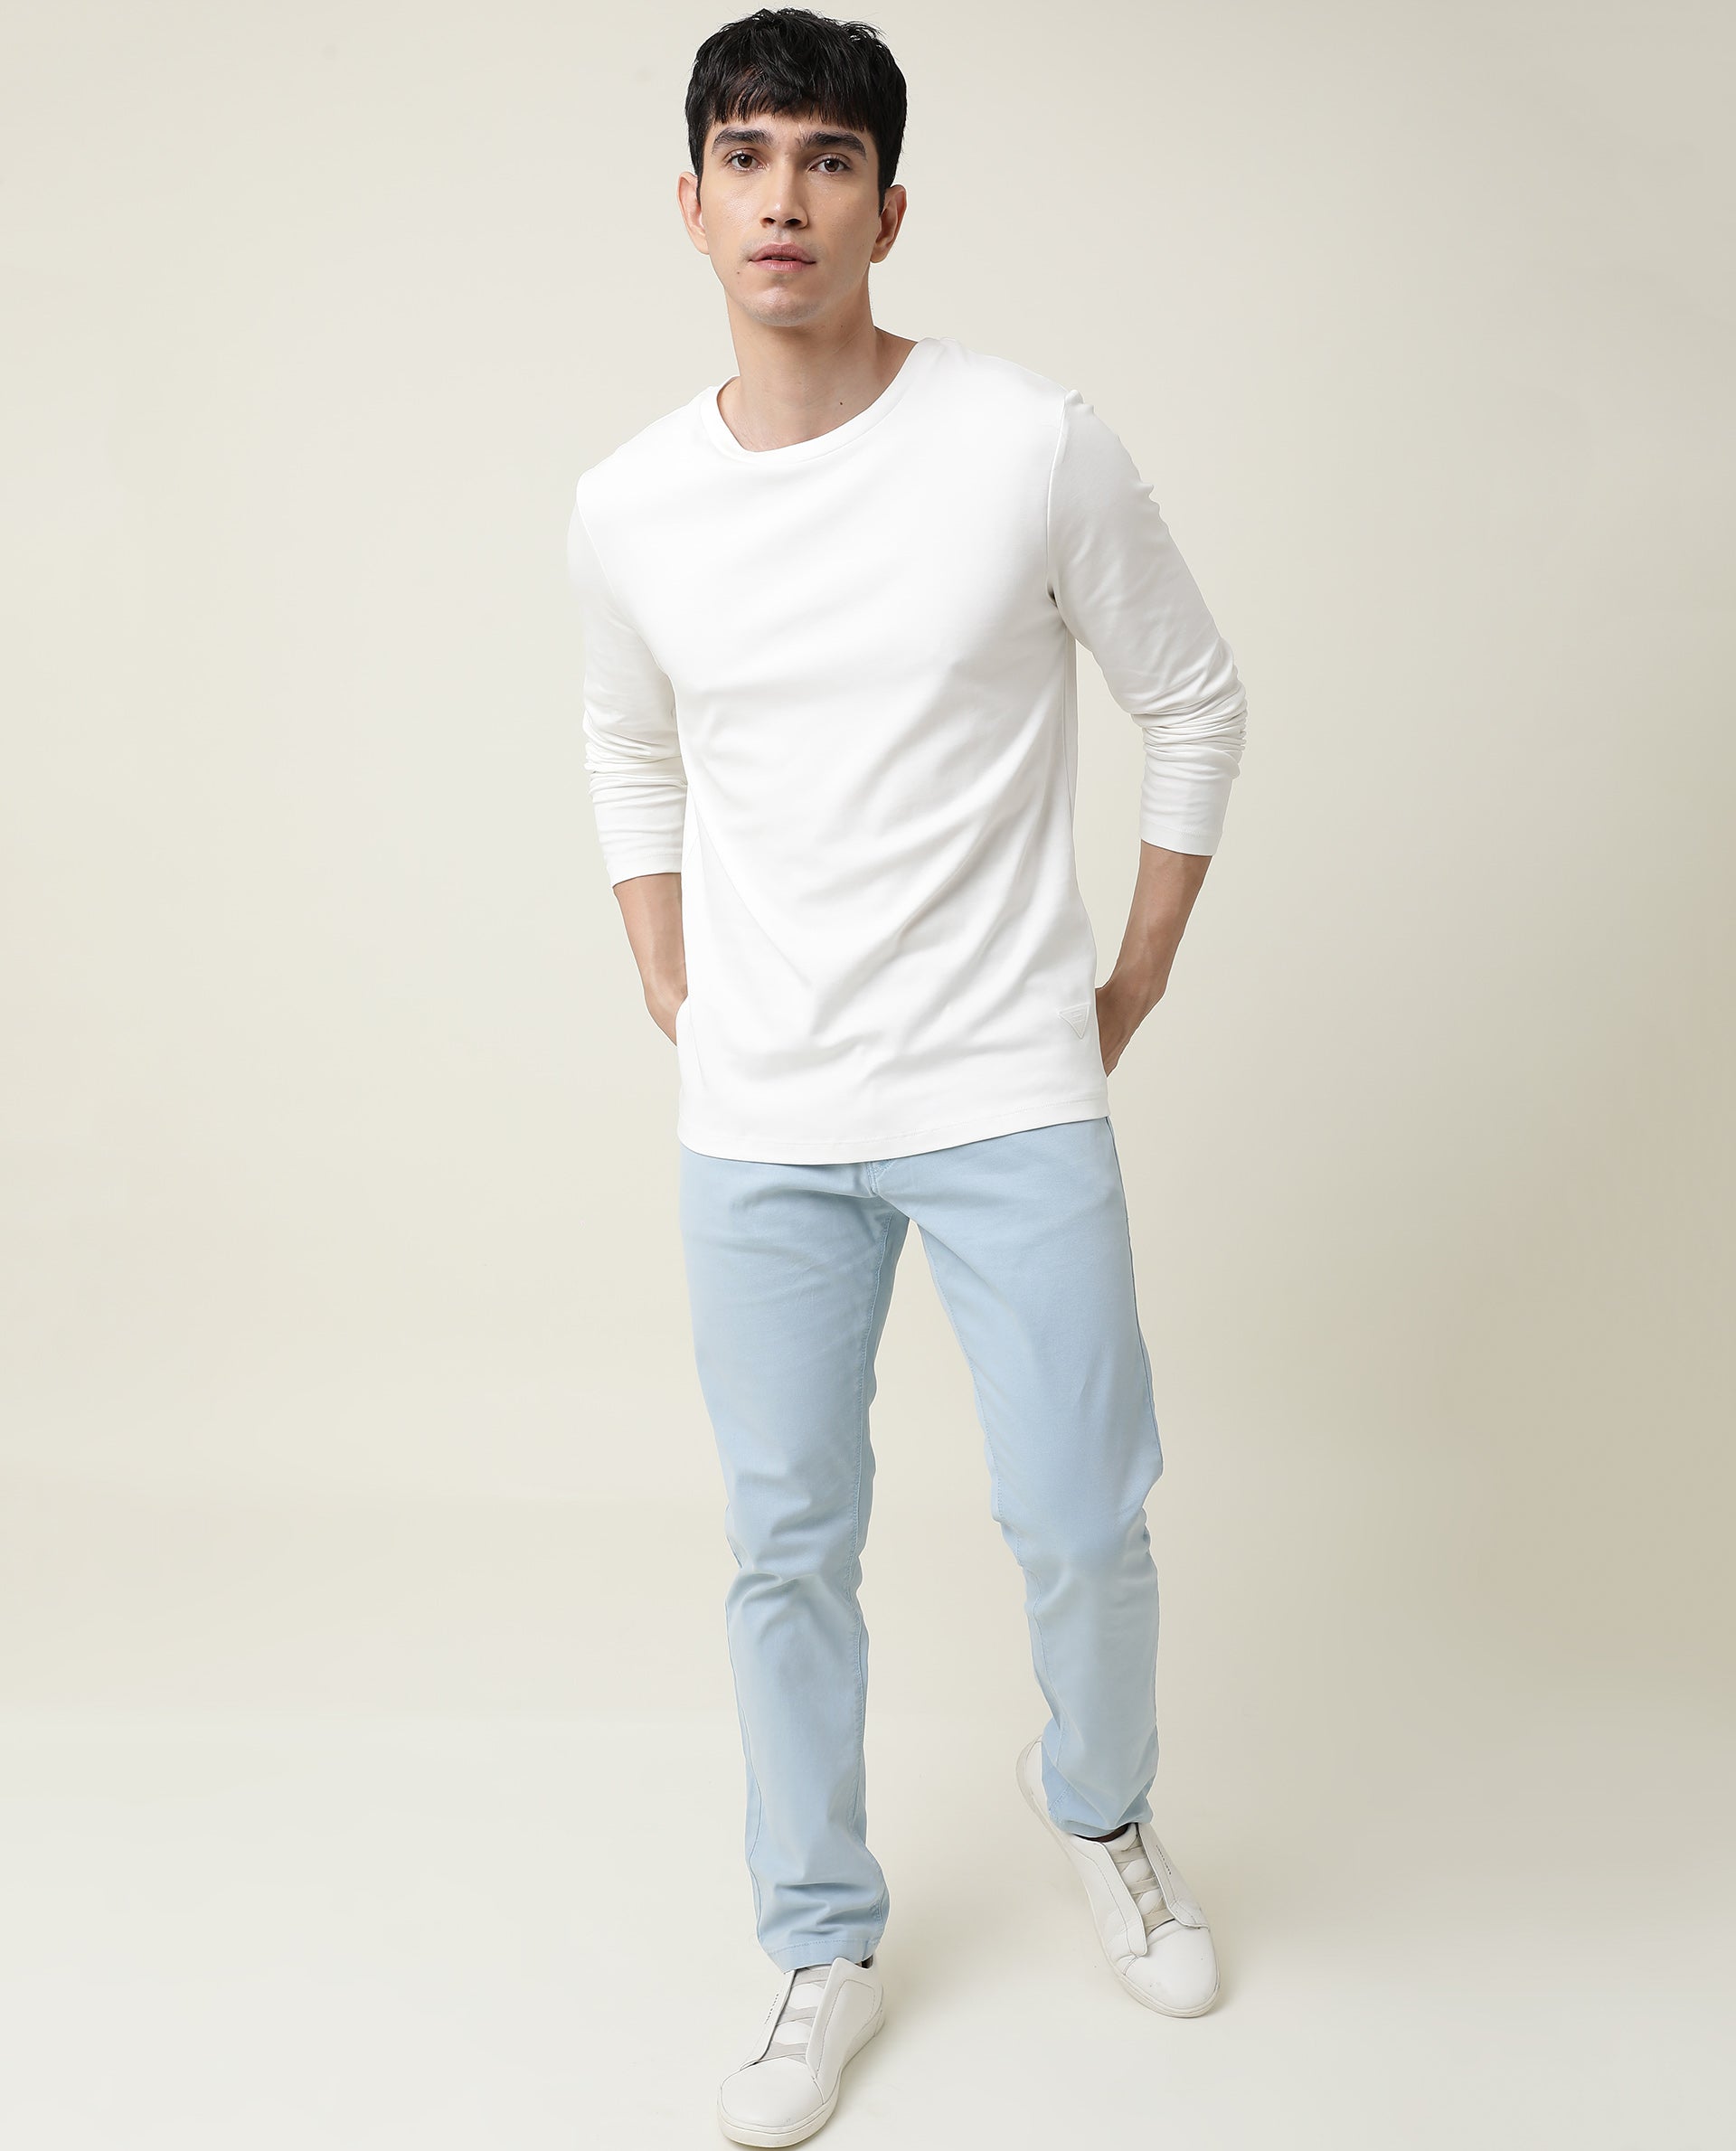 How To Style White T-shirts The Right Way | Mens casual outfits, Mens  fashion casual, Mens clothing styles